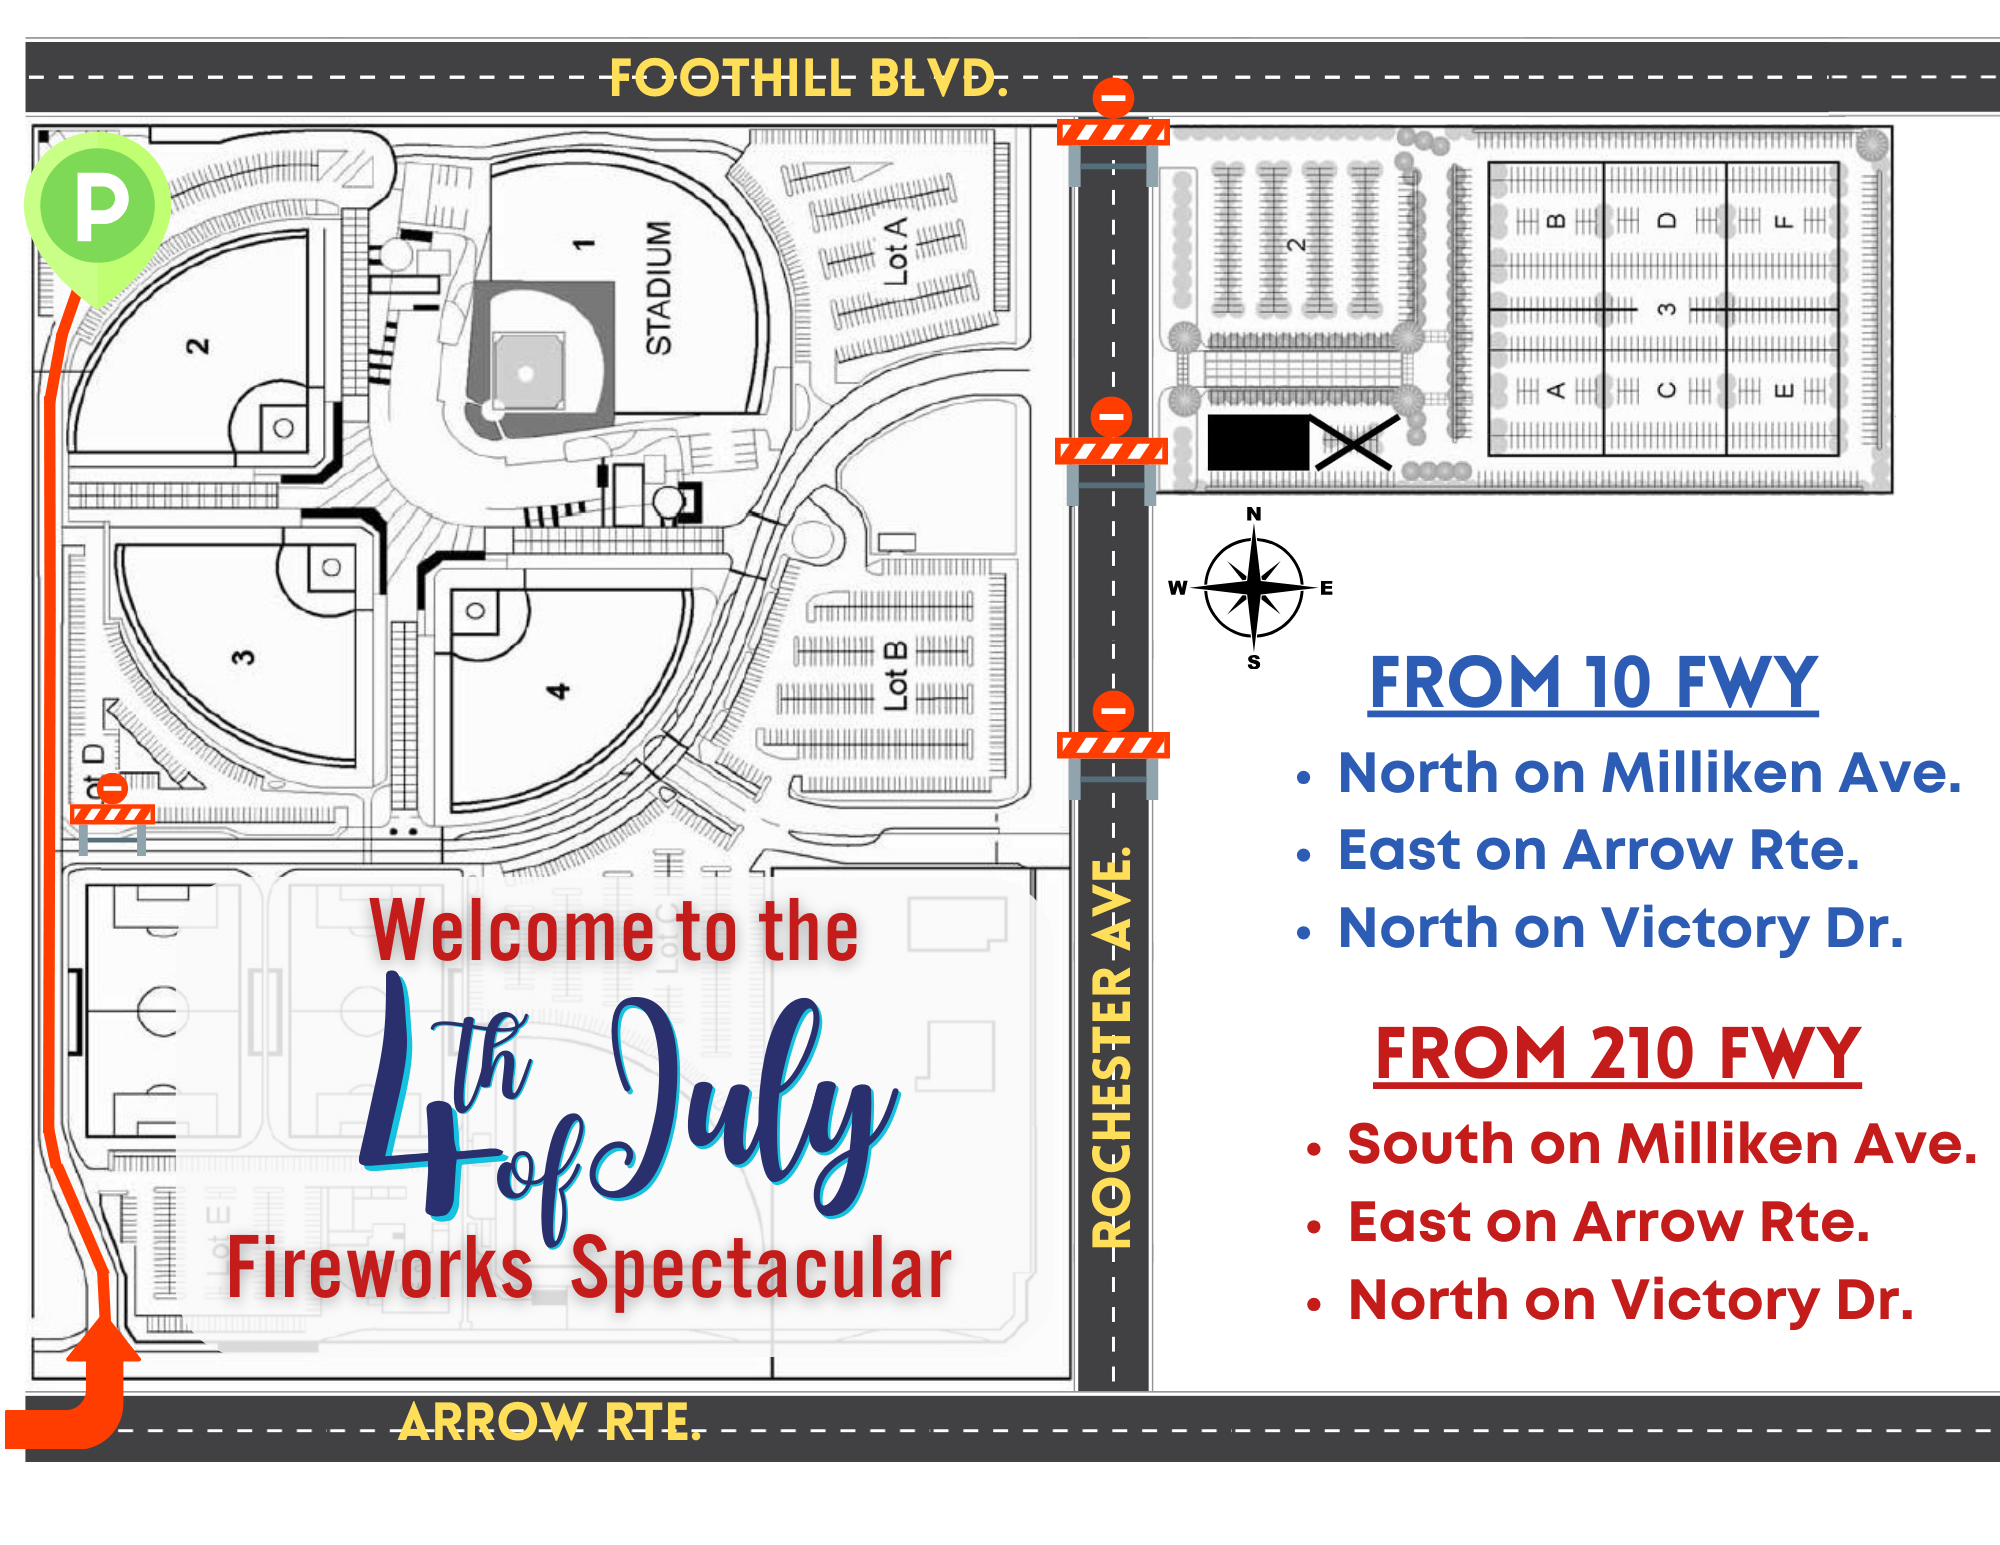 4th of July Site Map2